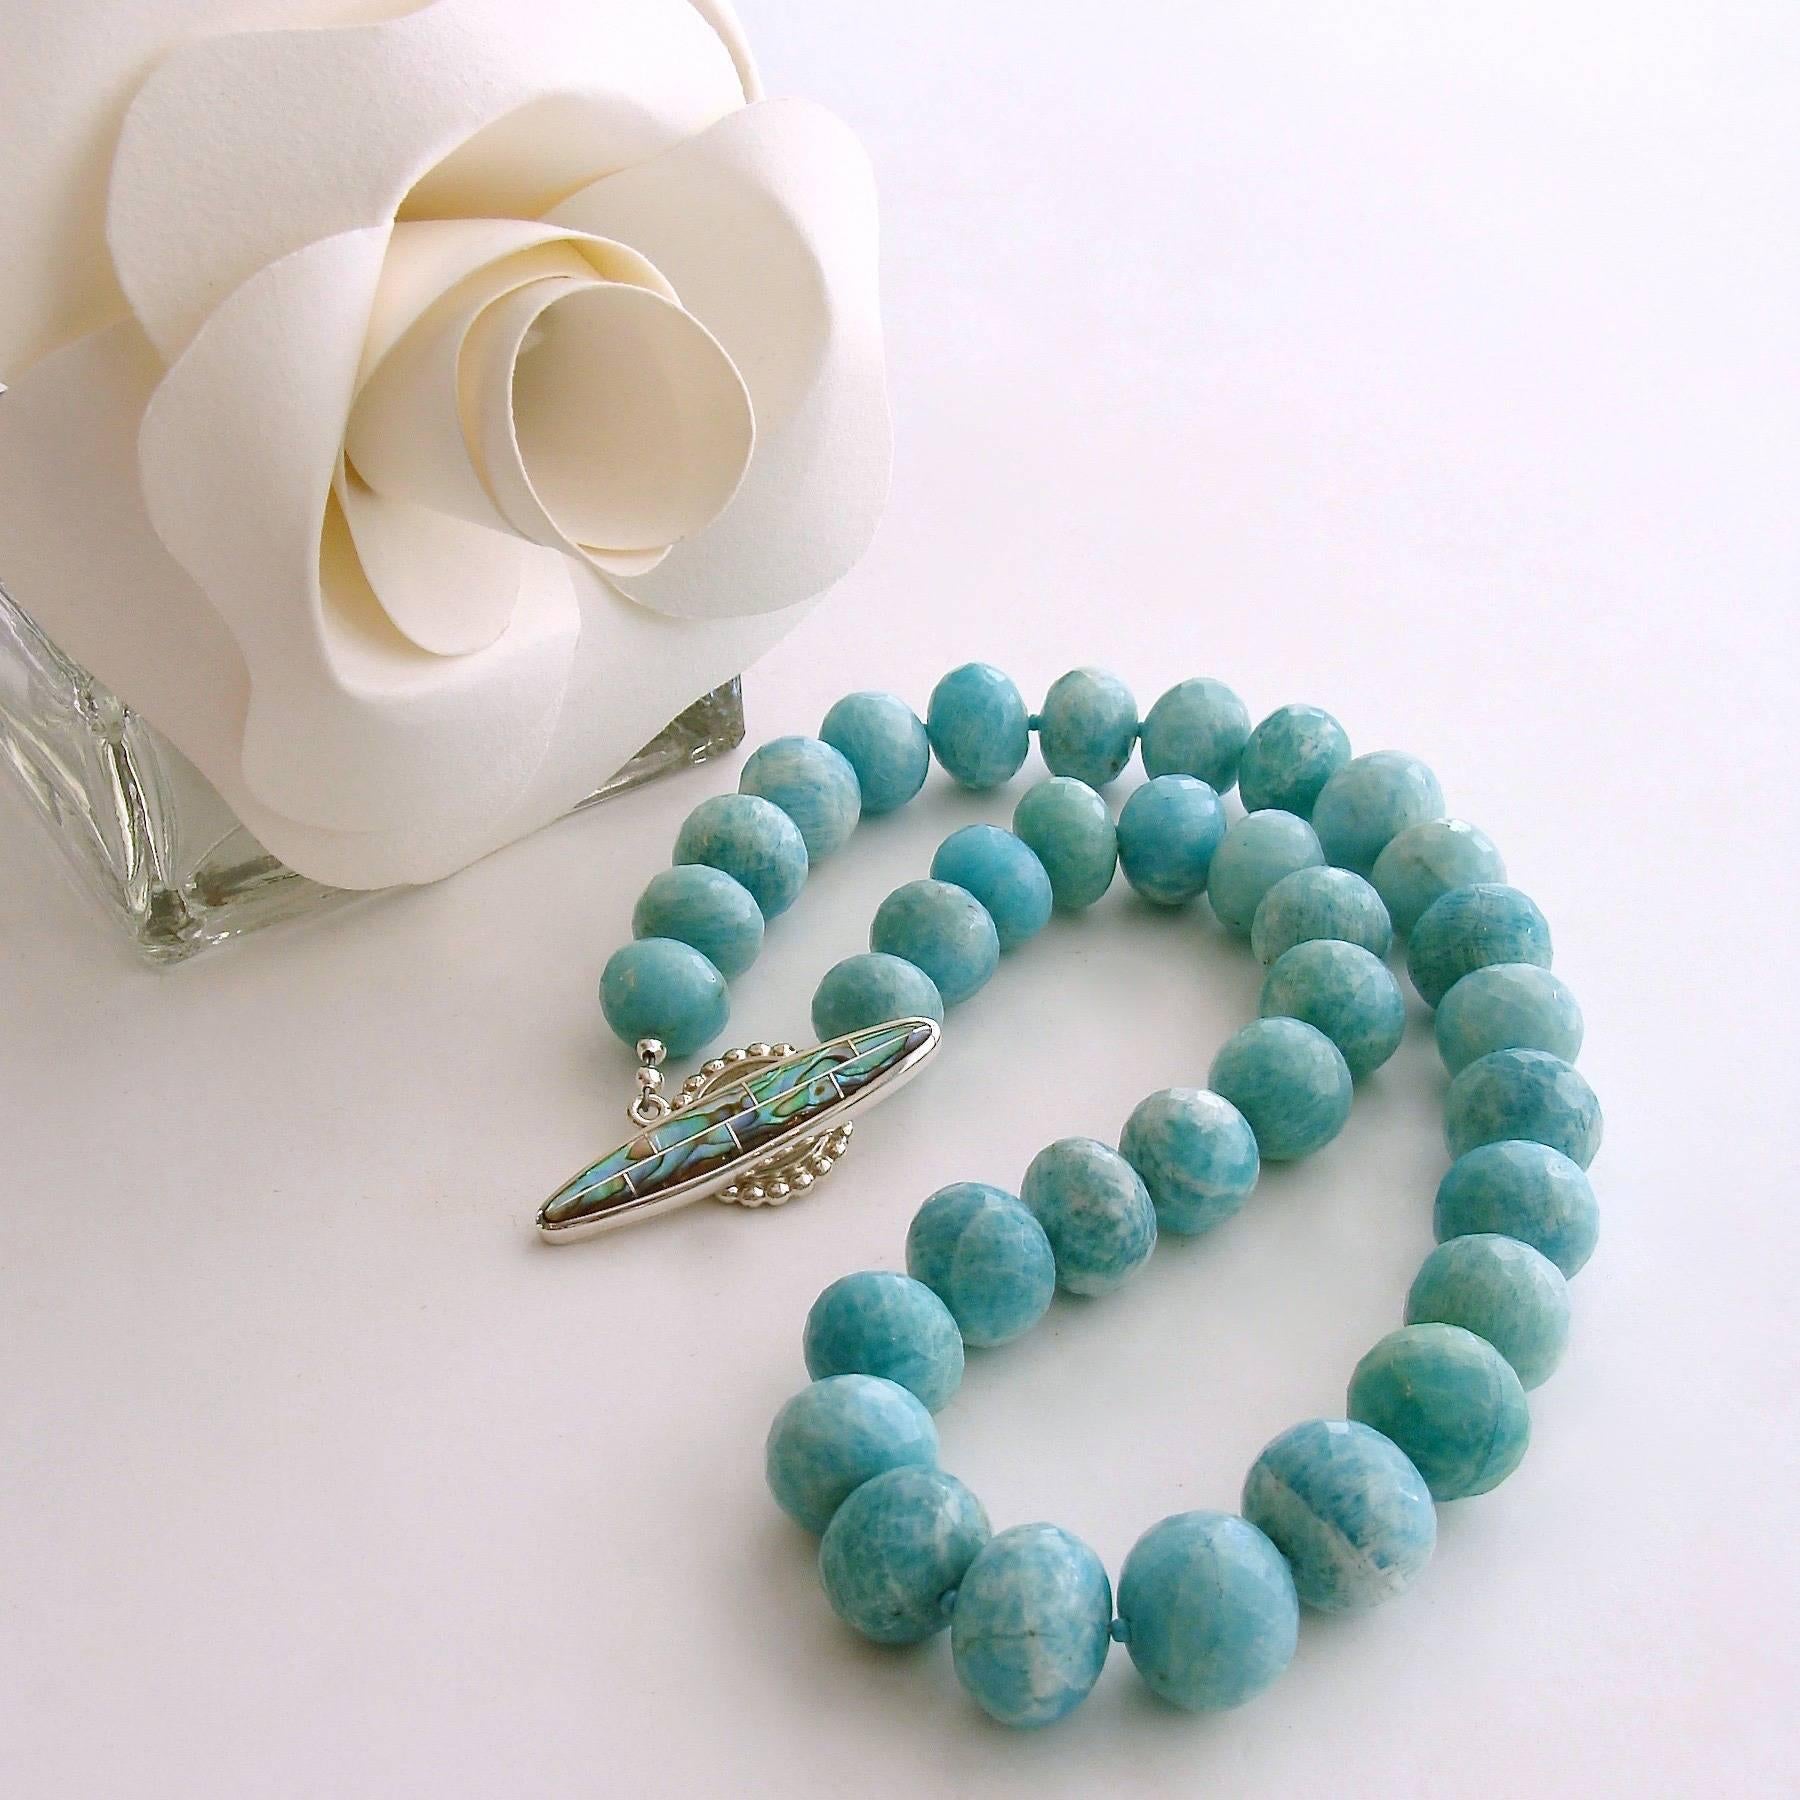 Amanda Necklace.

A gorgeous suite of graduated faceted amazonite rondelles is the basis of this  jaw dropping choker necklace.  Amazonite shares the same soft aqua coloring of natural turquoise, but is a more stable gemstone, which does not